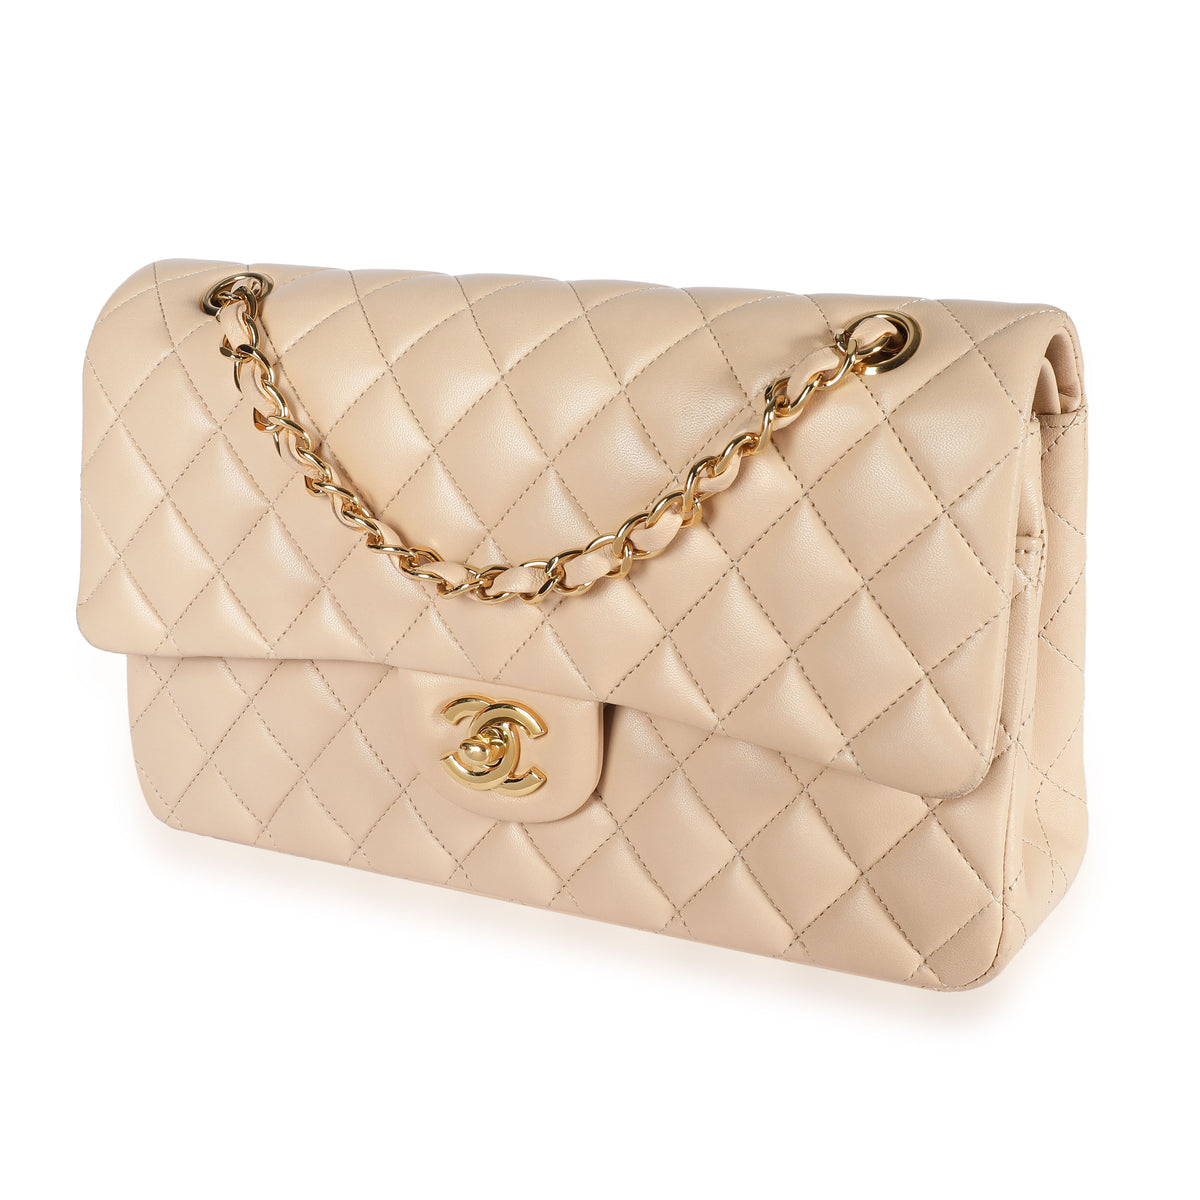 Chanel Beige Quilted Lambskin Medium Classic Double Flap Bag